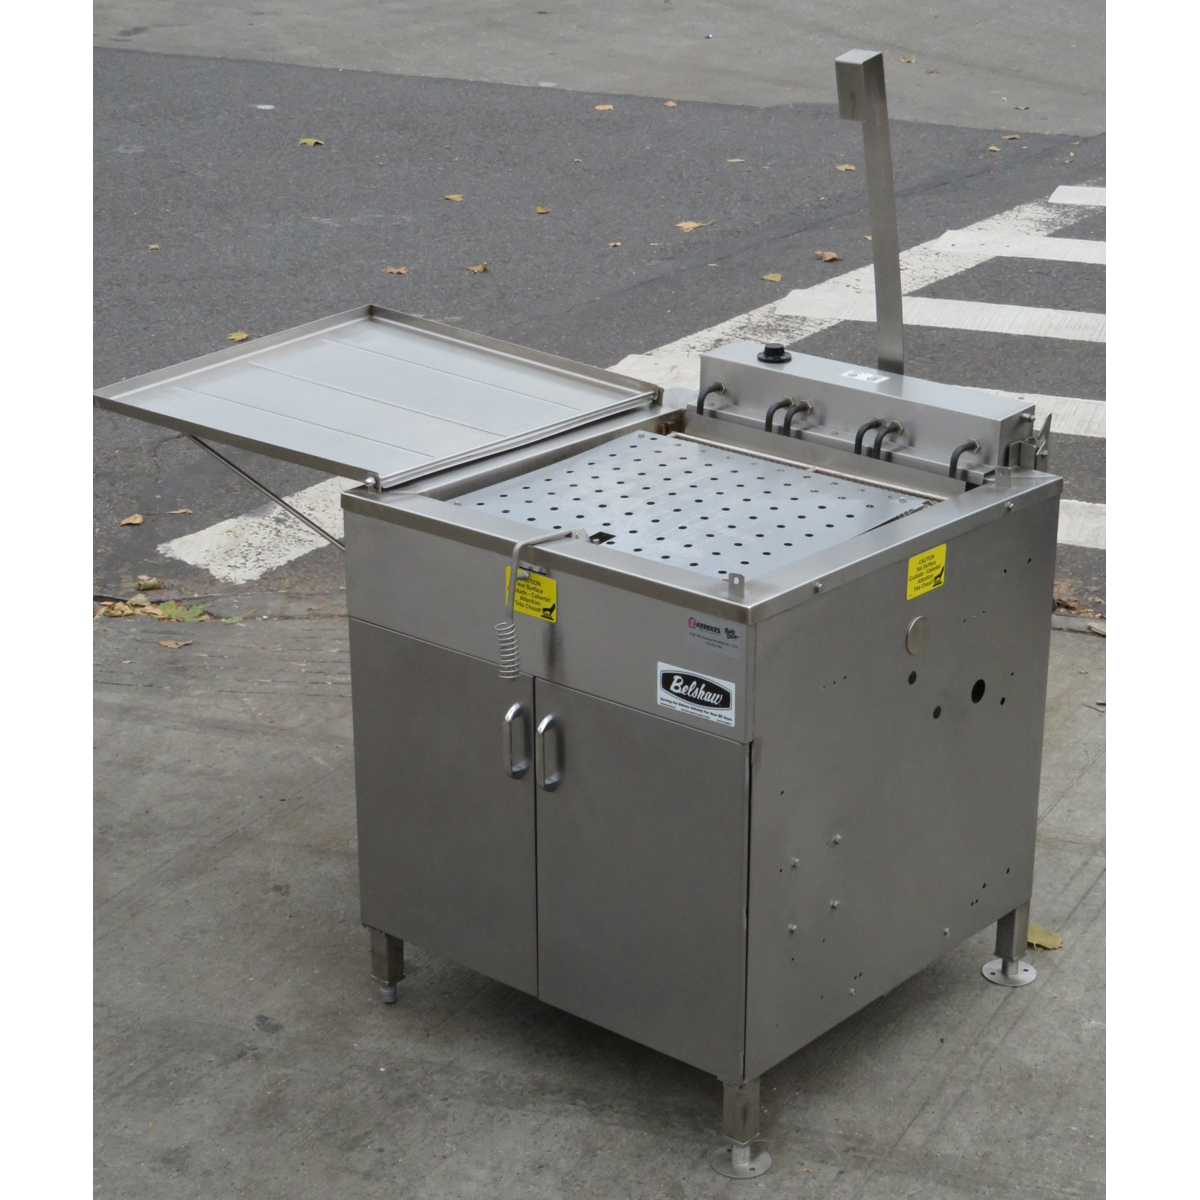 Belshaw 624 Electric Donut Fryer with Submerger, Used Excellent Condition image 2